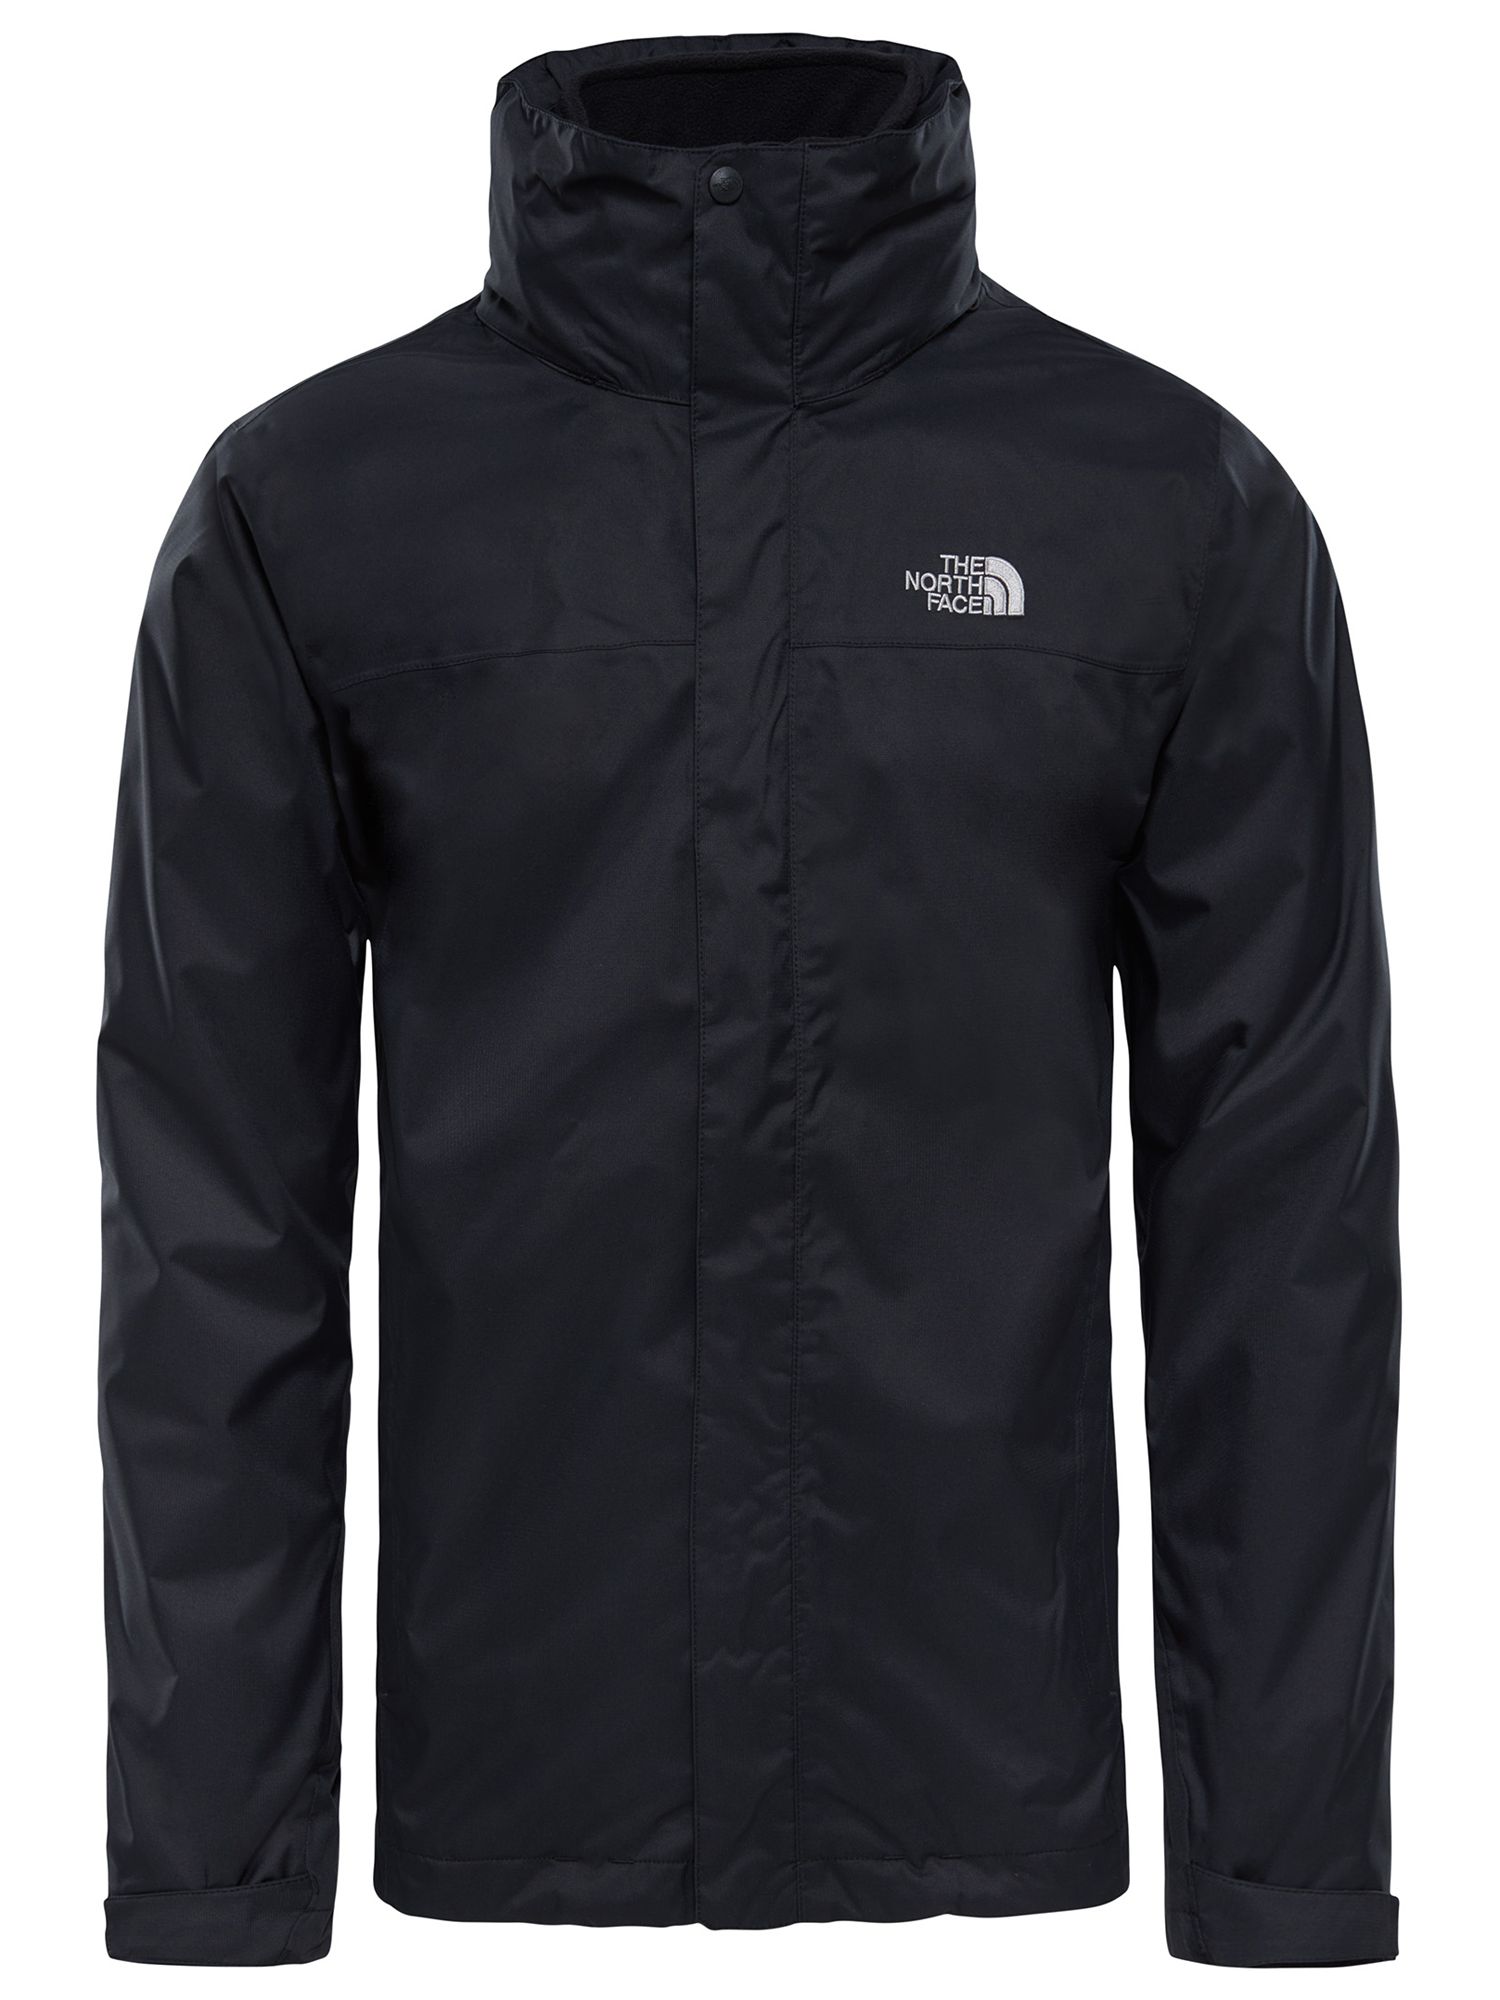 The North Face Evolve II Triclimate 3-in-1 Waterproof Men's Jacket, Black, S